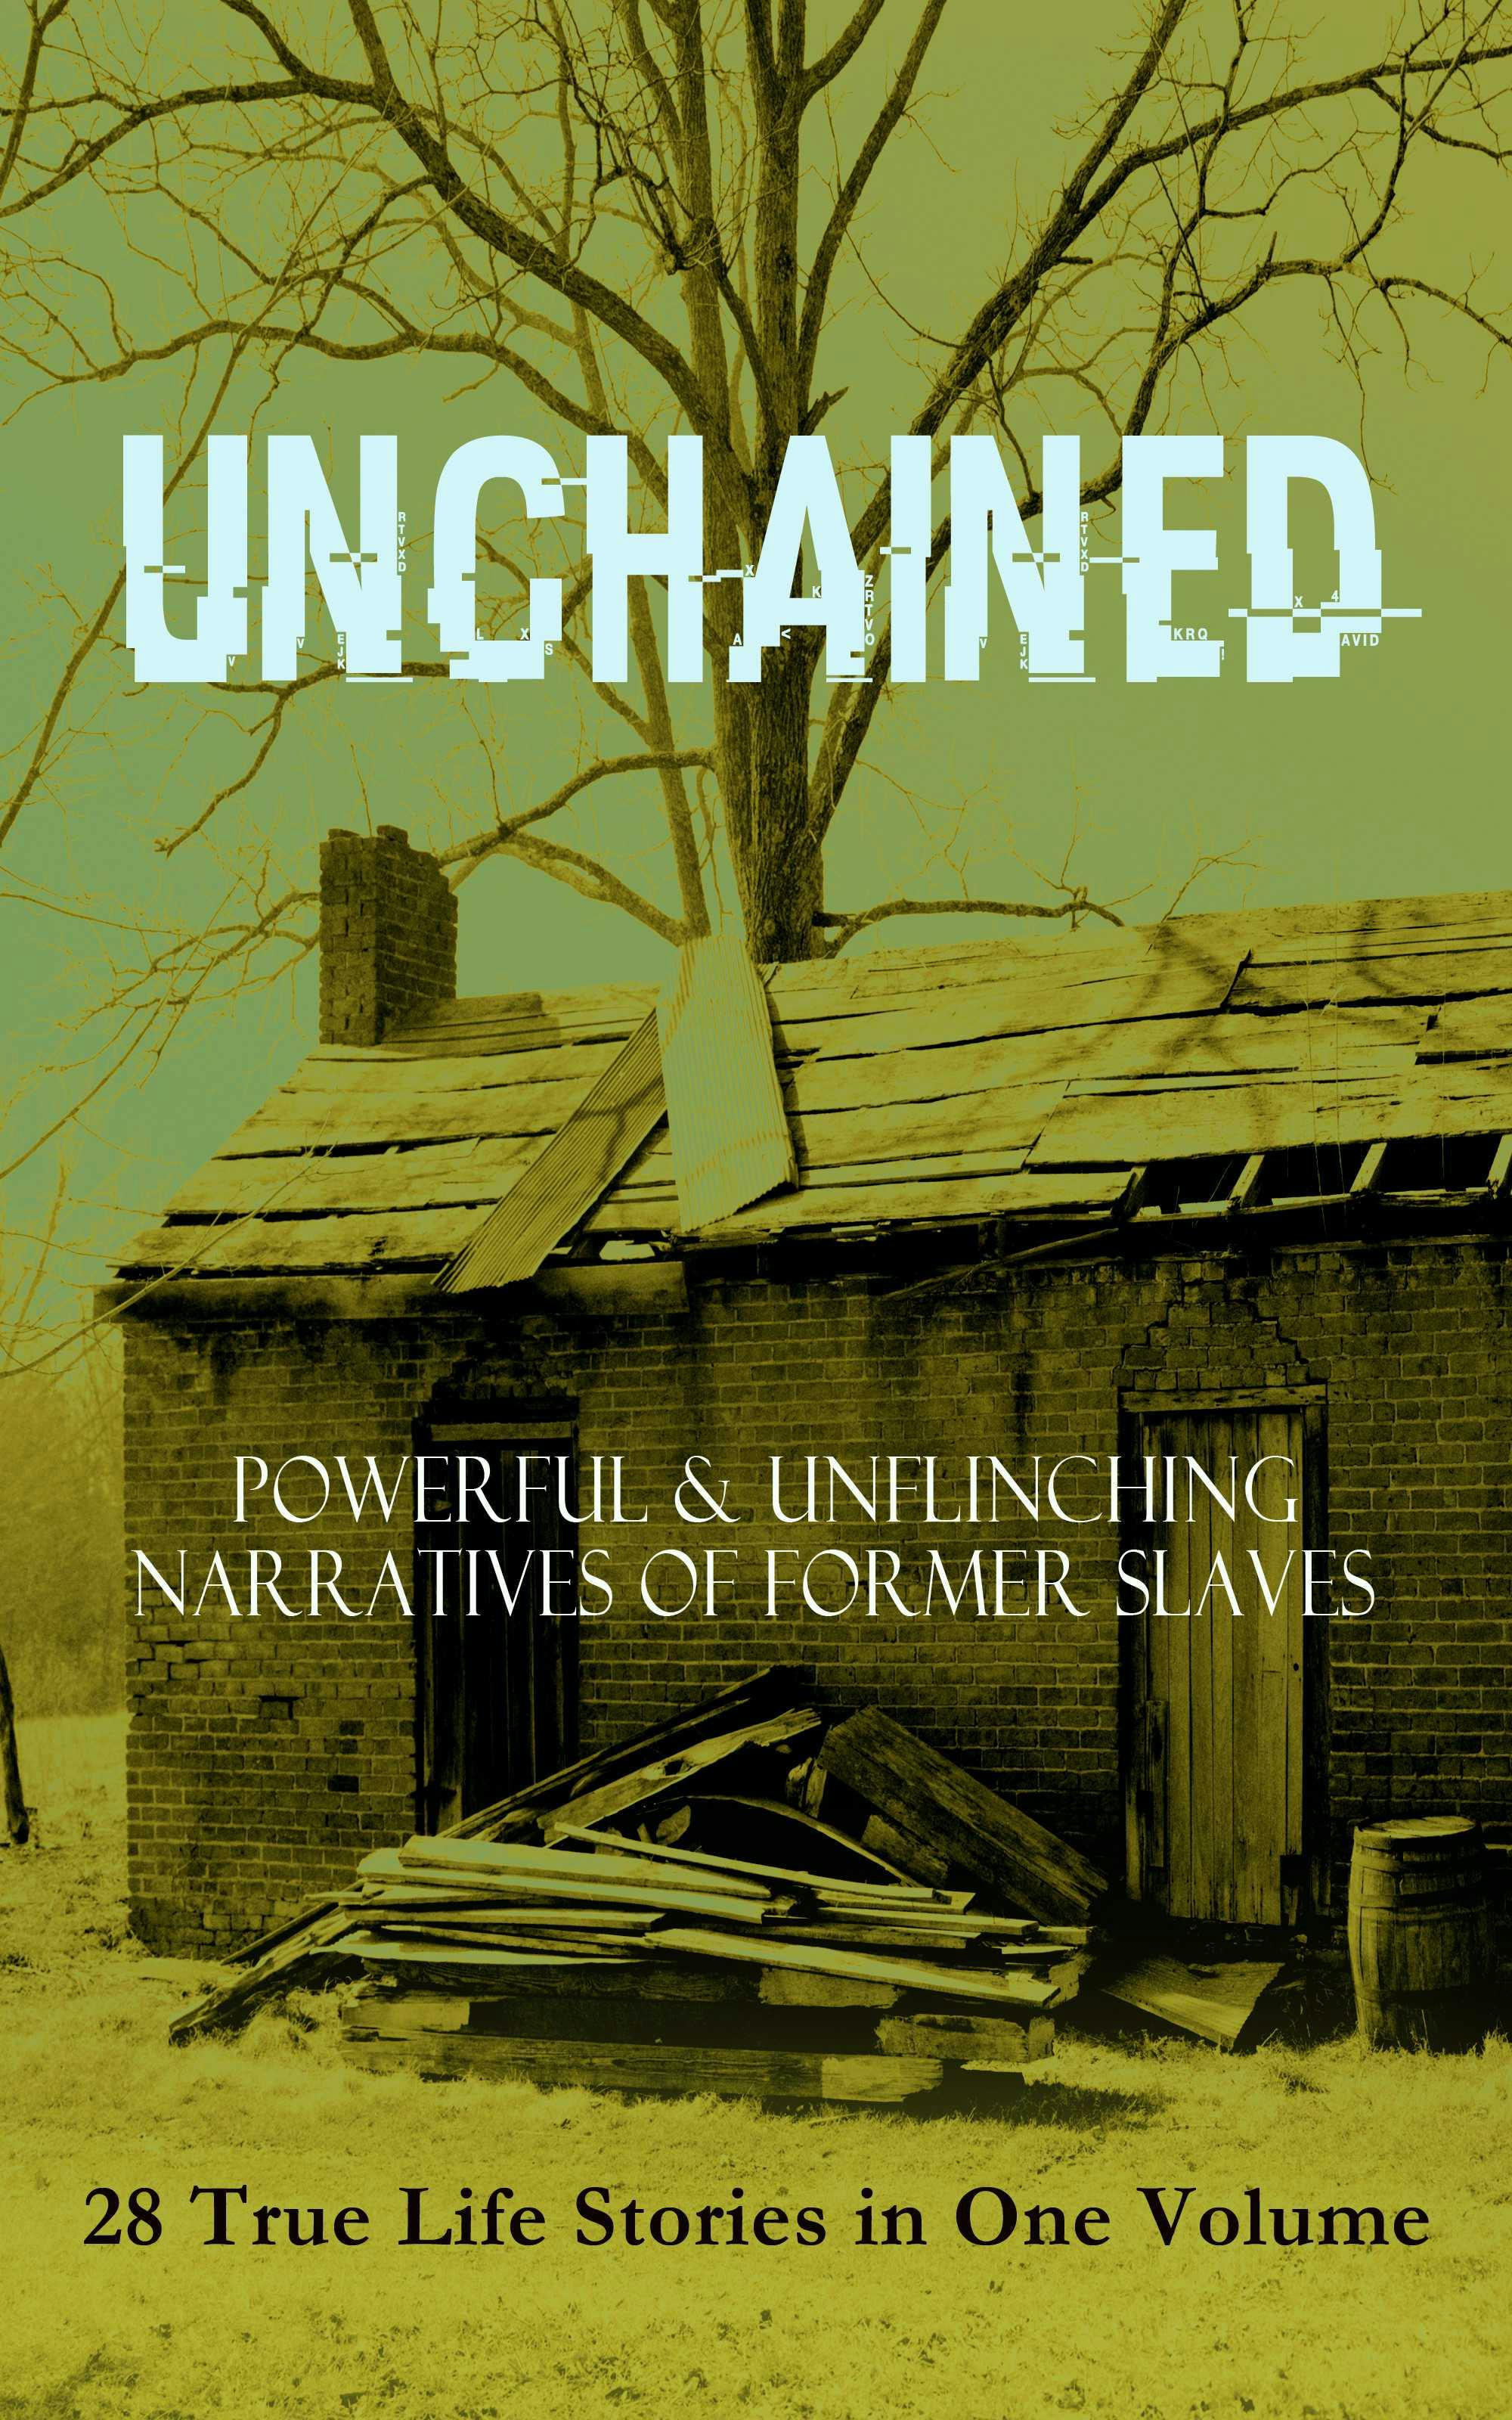 UNCHAINED - Powerful & Unflinching Narratives Of Former Slaves: 28 True Life Stories in One Volume: Including Hundreds of Documented Testimonies, Records on Living Conditions and Customs in the South & History of Abolitionist Movement - Theodore Canot, Harriet Jacobs, Henry Bibb, William Craft, John Gabriel Stedman, F. G. De Fontaine, Joseph Mountain, Ellen Craft, Willie Lynch, Moses Grandy, Austin Steward, Nat Turner, Kate Drumgoold, Margaretta Matilda Odell, Brantz Mayer, Lydia Maria Child, William Wells Brown, Thomas S. Gaines, L. S. Thompson, Jacob D. Green, Booker T. Washington, Solomon Northup, Olaudah Equiano, Frederick Douglass, William Still, Daniel Drayton, Mary Prince, Lucy A. Delaney, Sojourner Truth, Elizabeth Keckley, Josiah Henson, Stephen Smith, Sarah H. Bradford, John Dixon Long, Ida B. Wells-Barnett, Charles Ball, Henry Box Brown, Thomas Clarkson, Louis Hughes